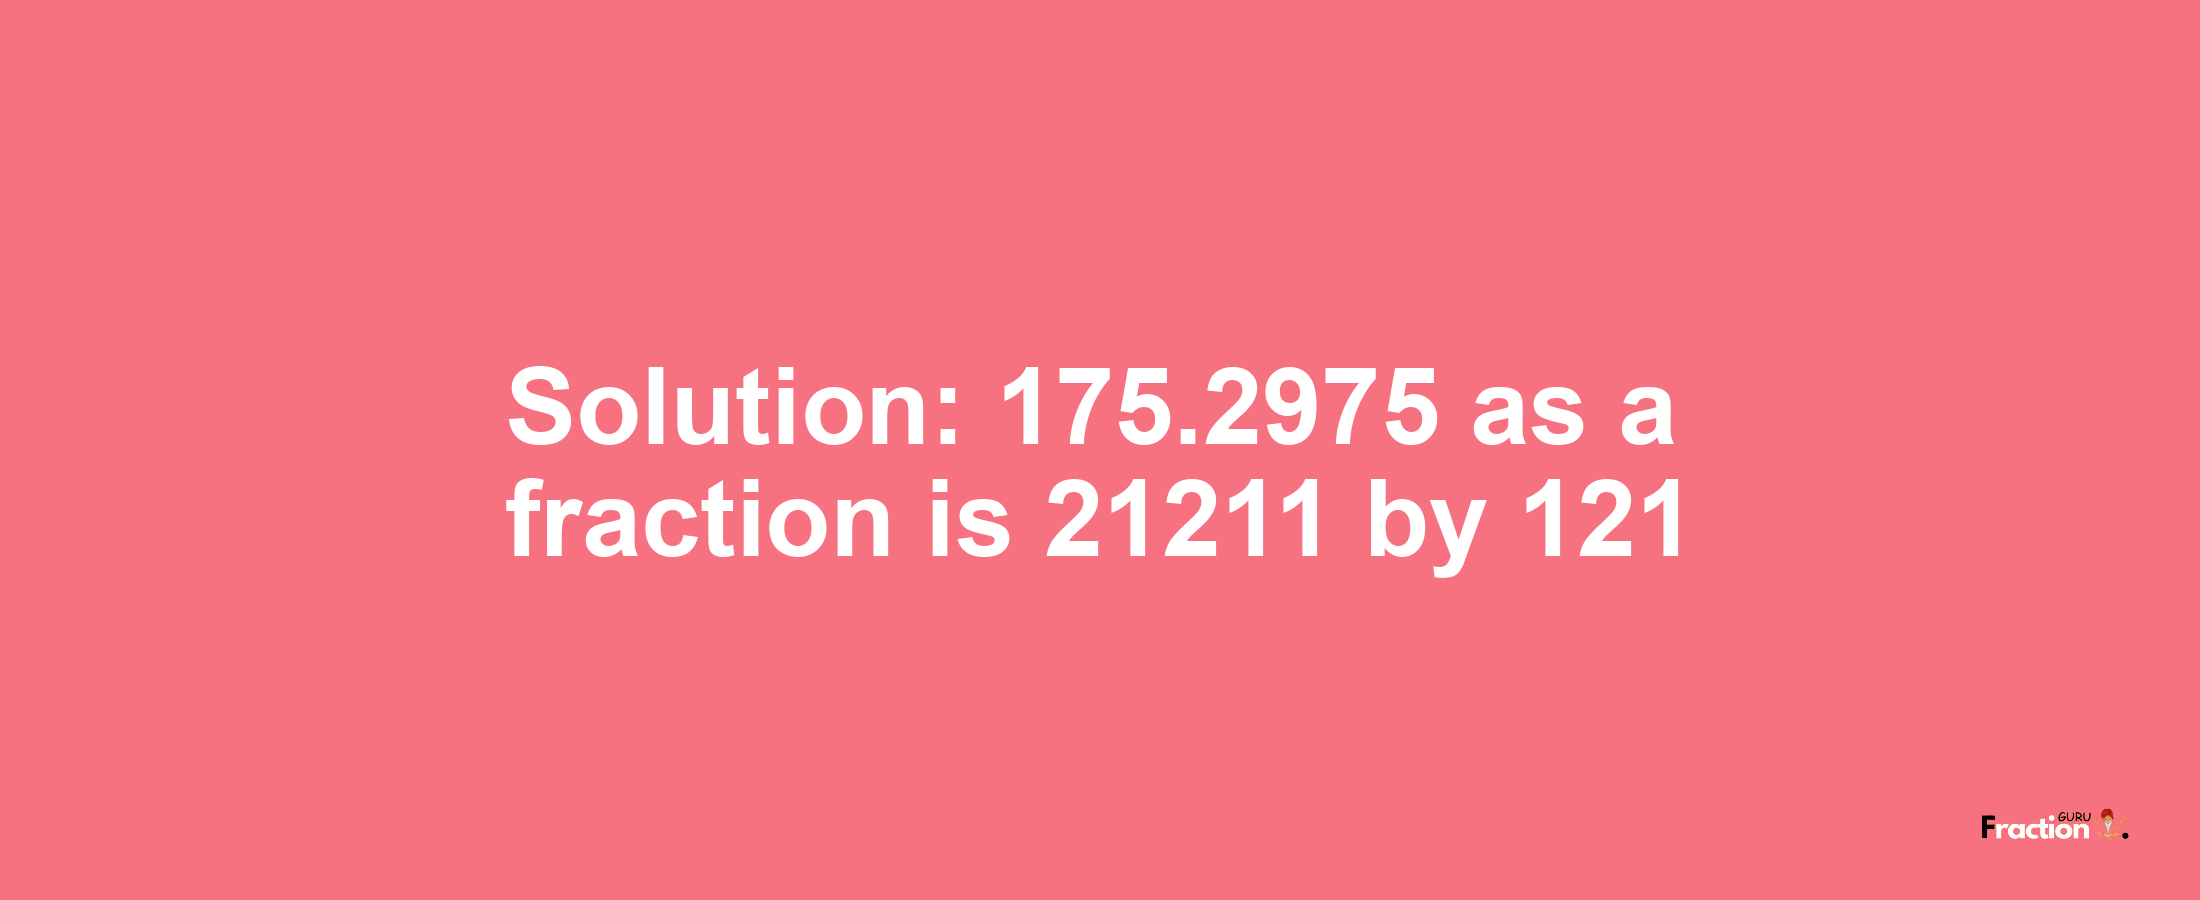 Solution:175.2975 as a fraction is 21211/121